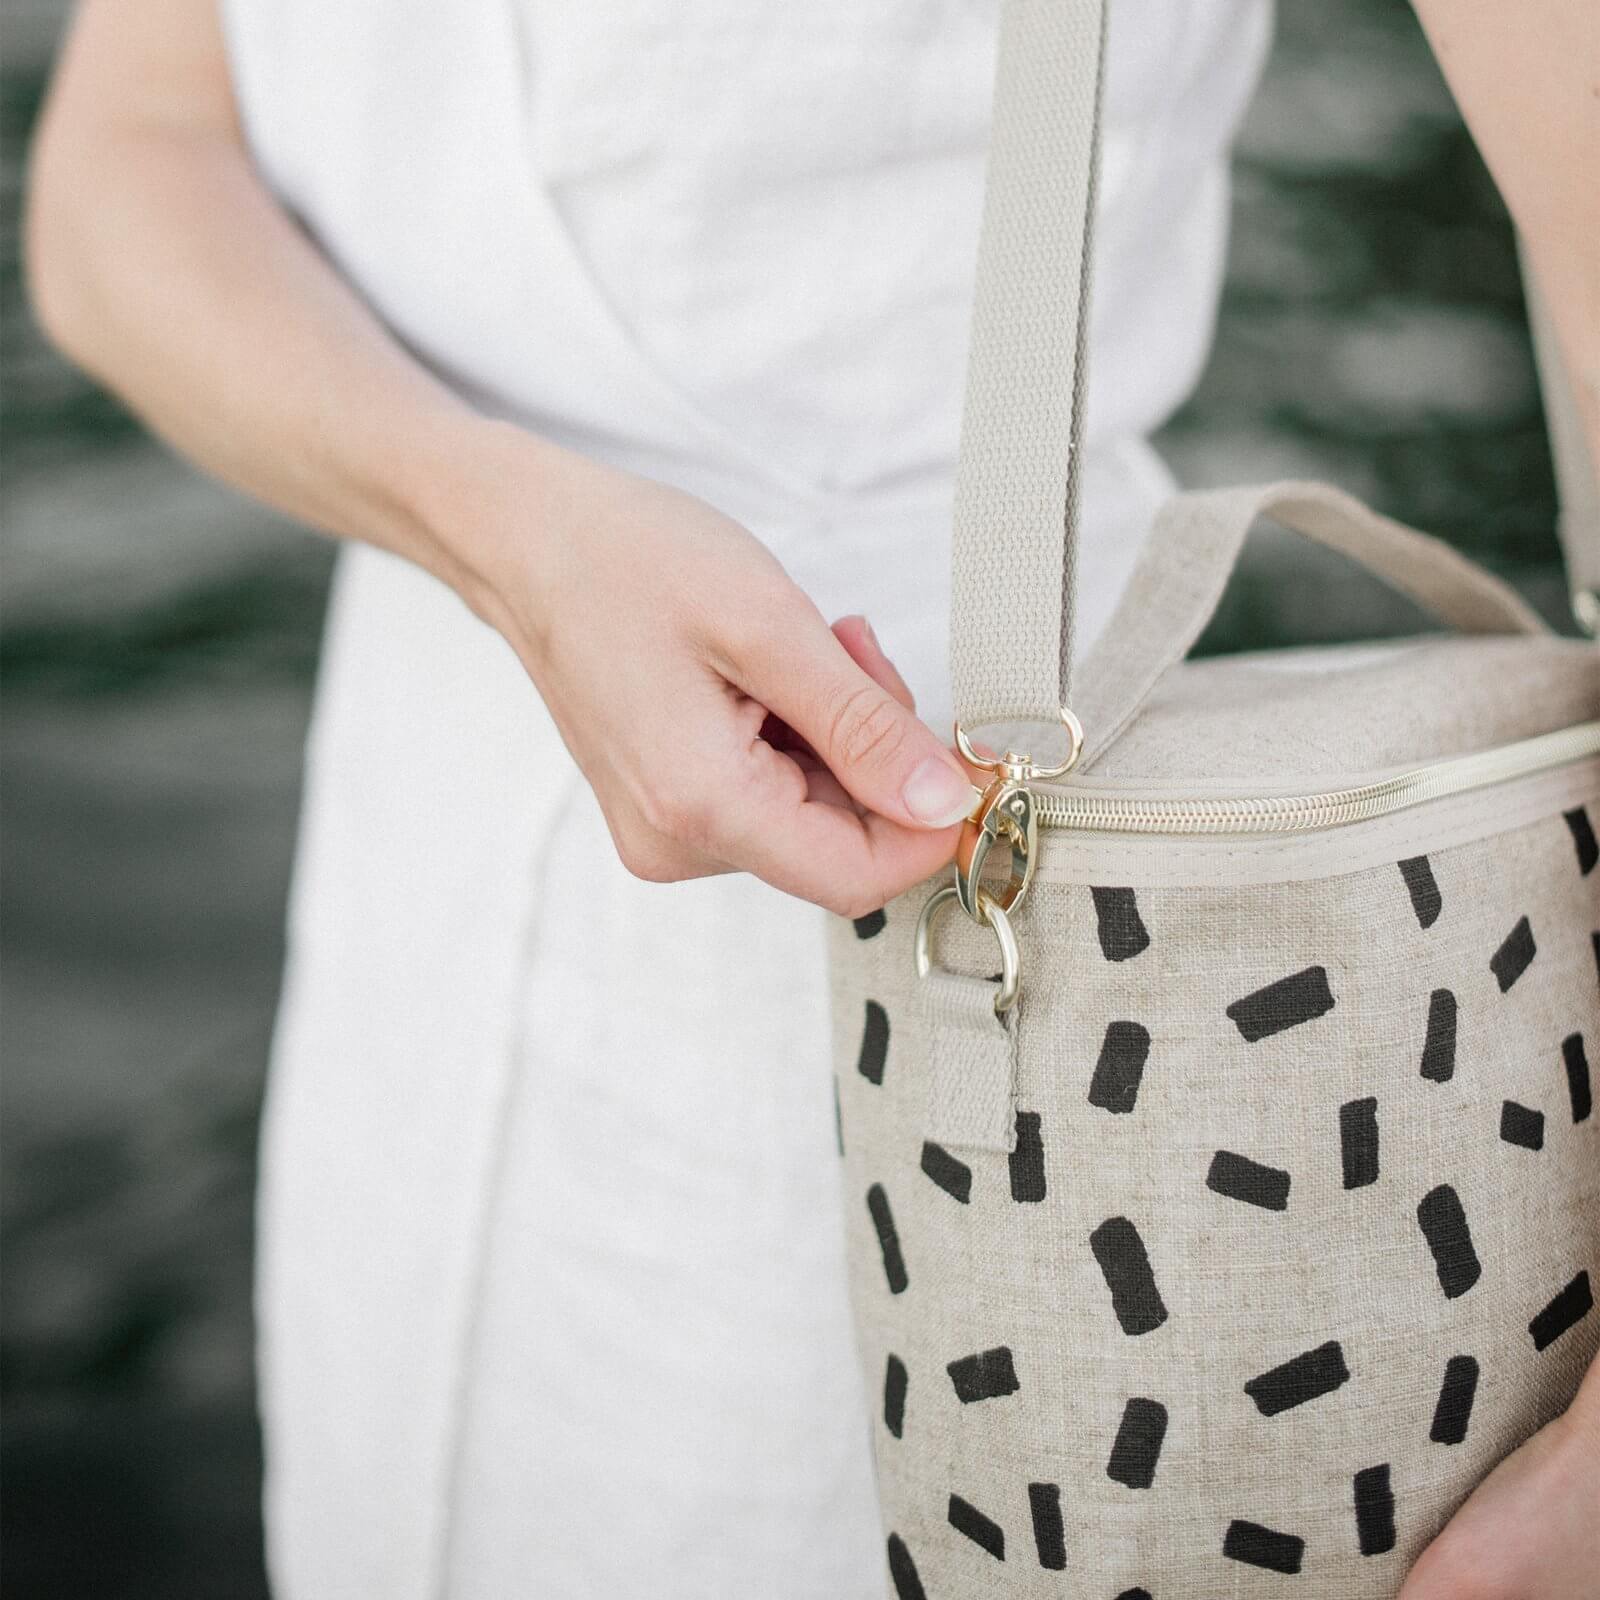 Linen Lunch Poche Bag - Confetti Block - by SoYoung on the go SoYoung Prettycleanshop